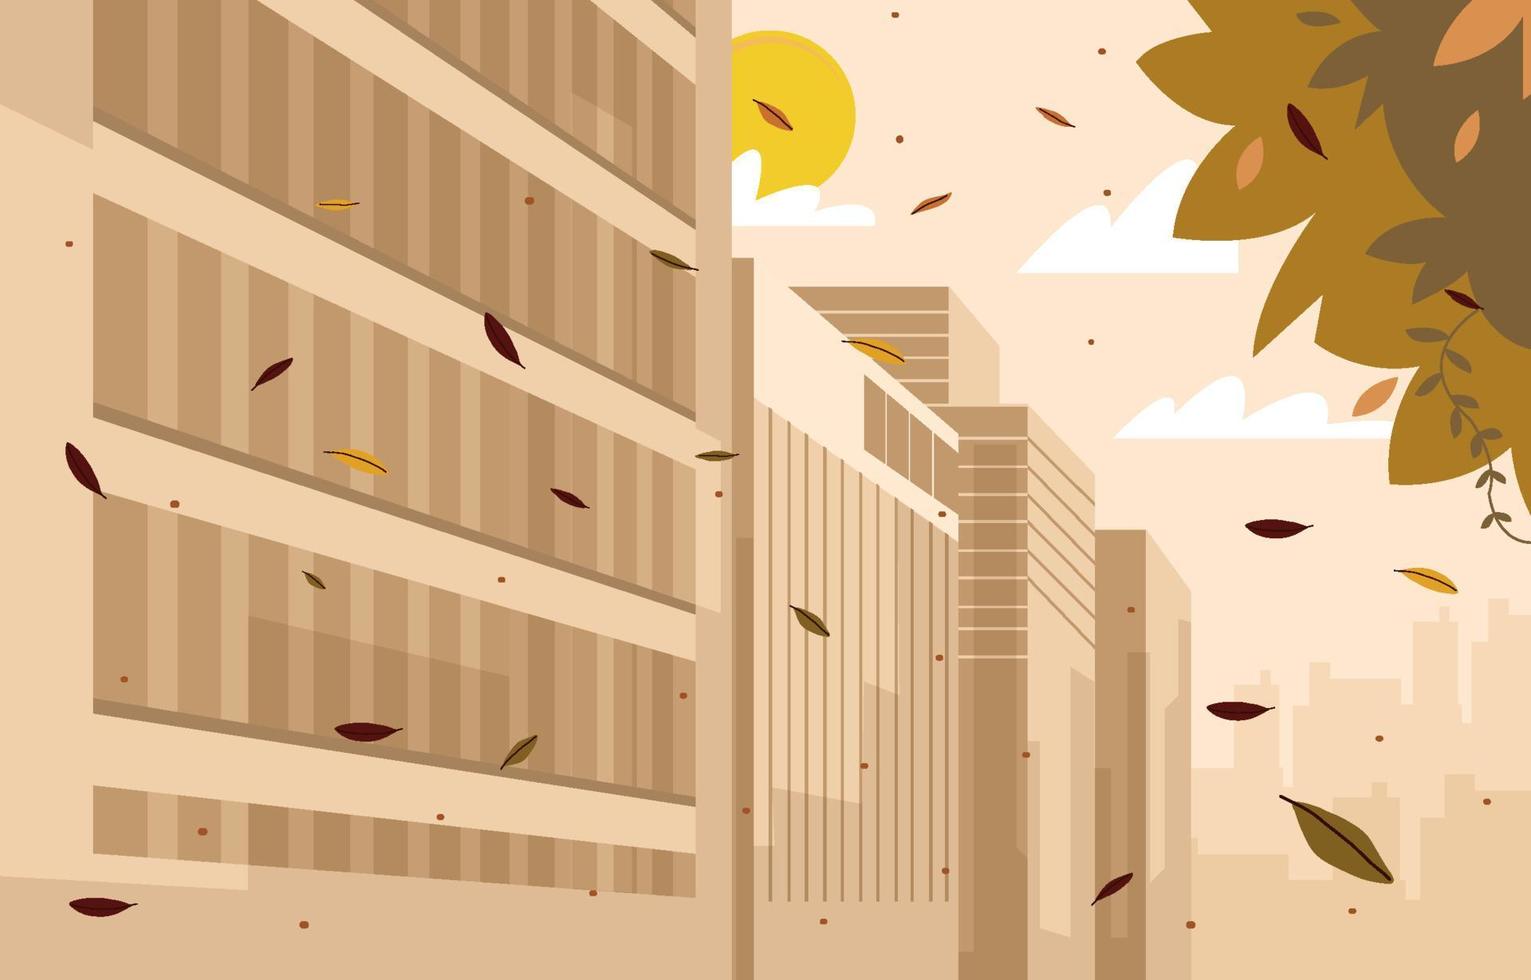 Fallen Leaves in City Background vector